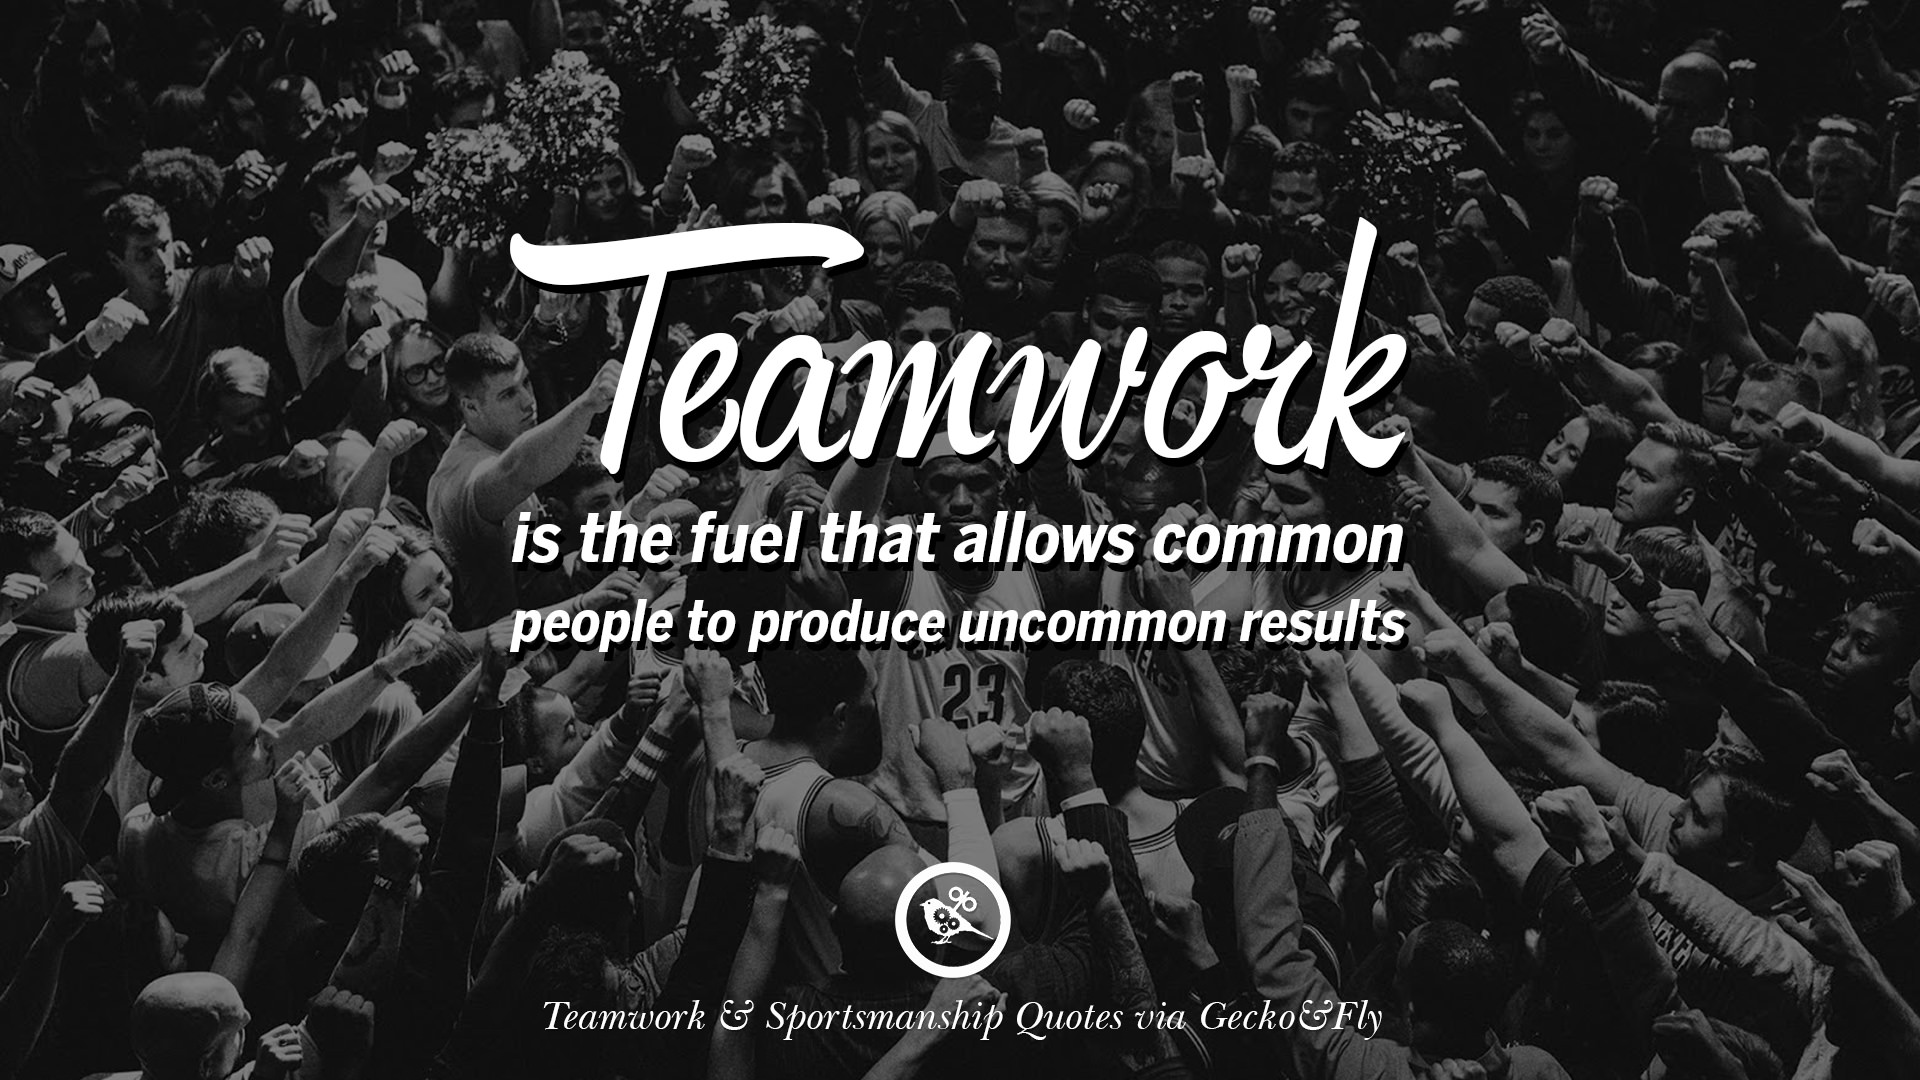 50 Inspirational Quotes About Teamwork And Sportsmanship